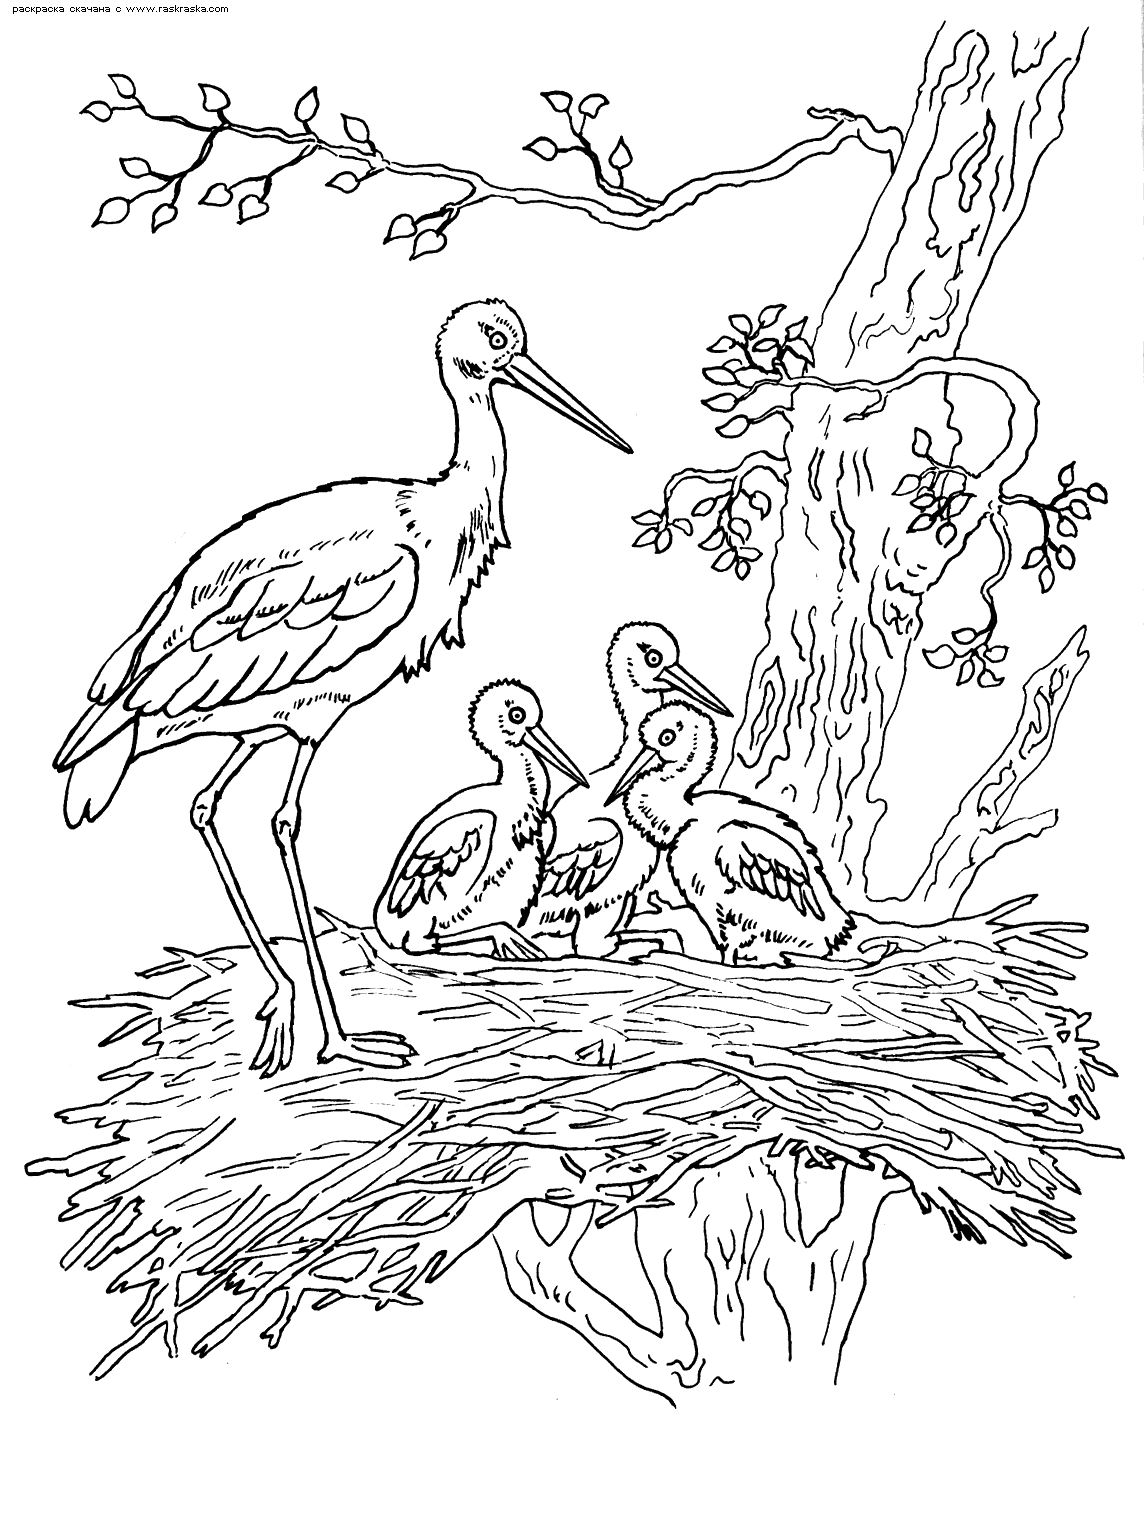 Stork family - Animal Coloring pages ...justcolor.net